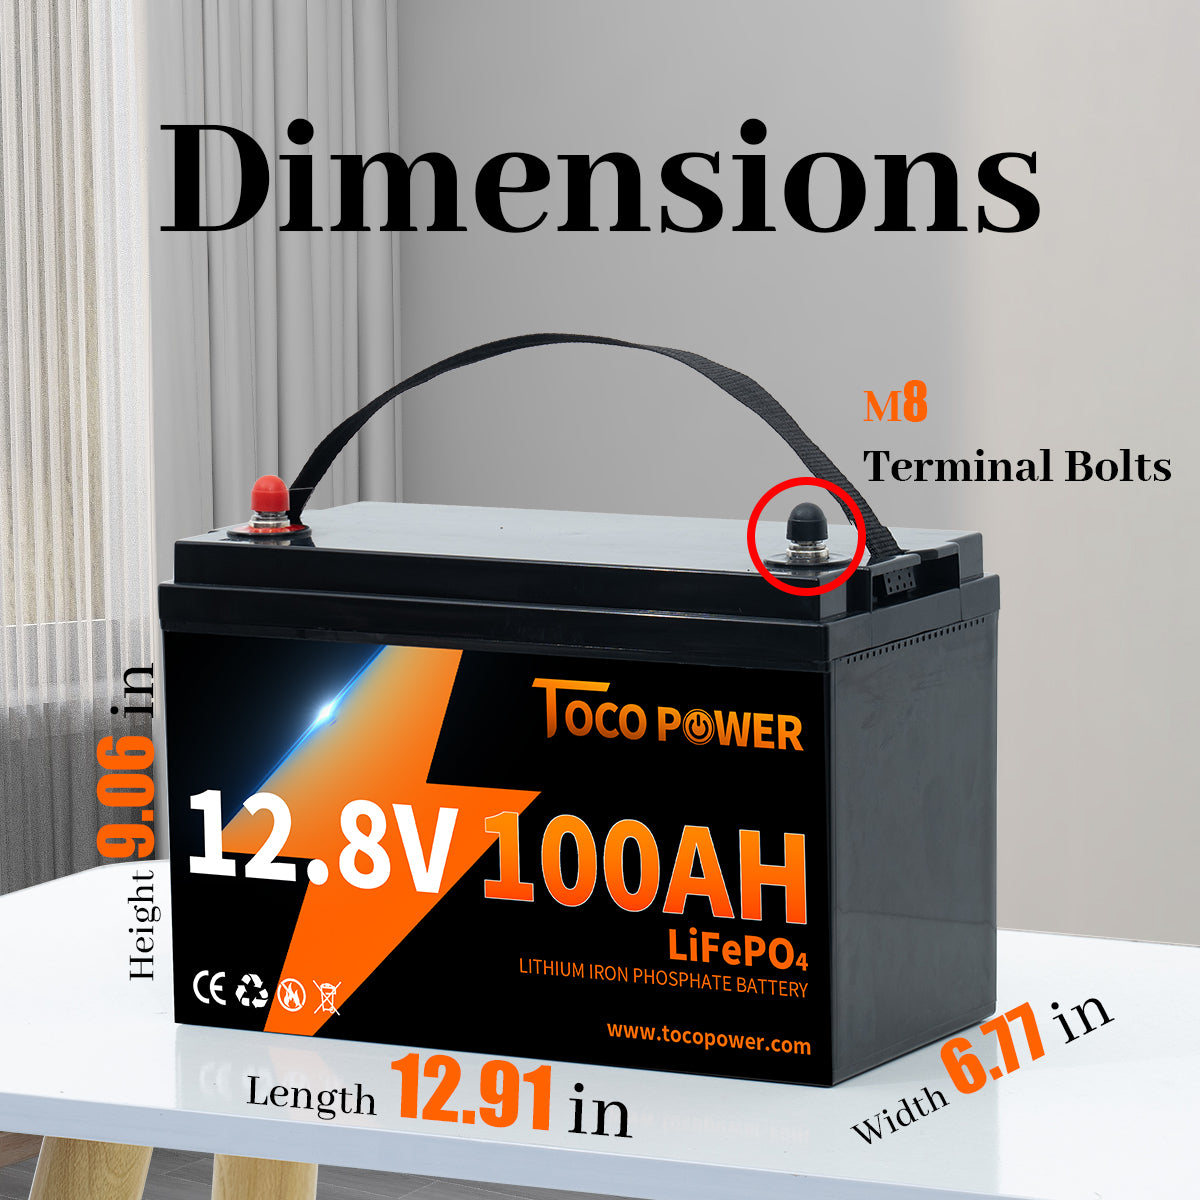 Chargeur 600W-25A pour batterie 12V Lithium Fer Phosphate